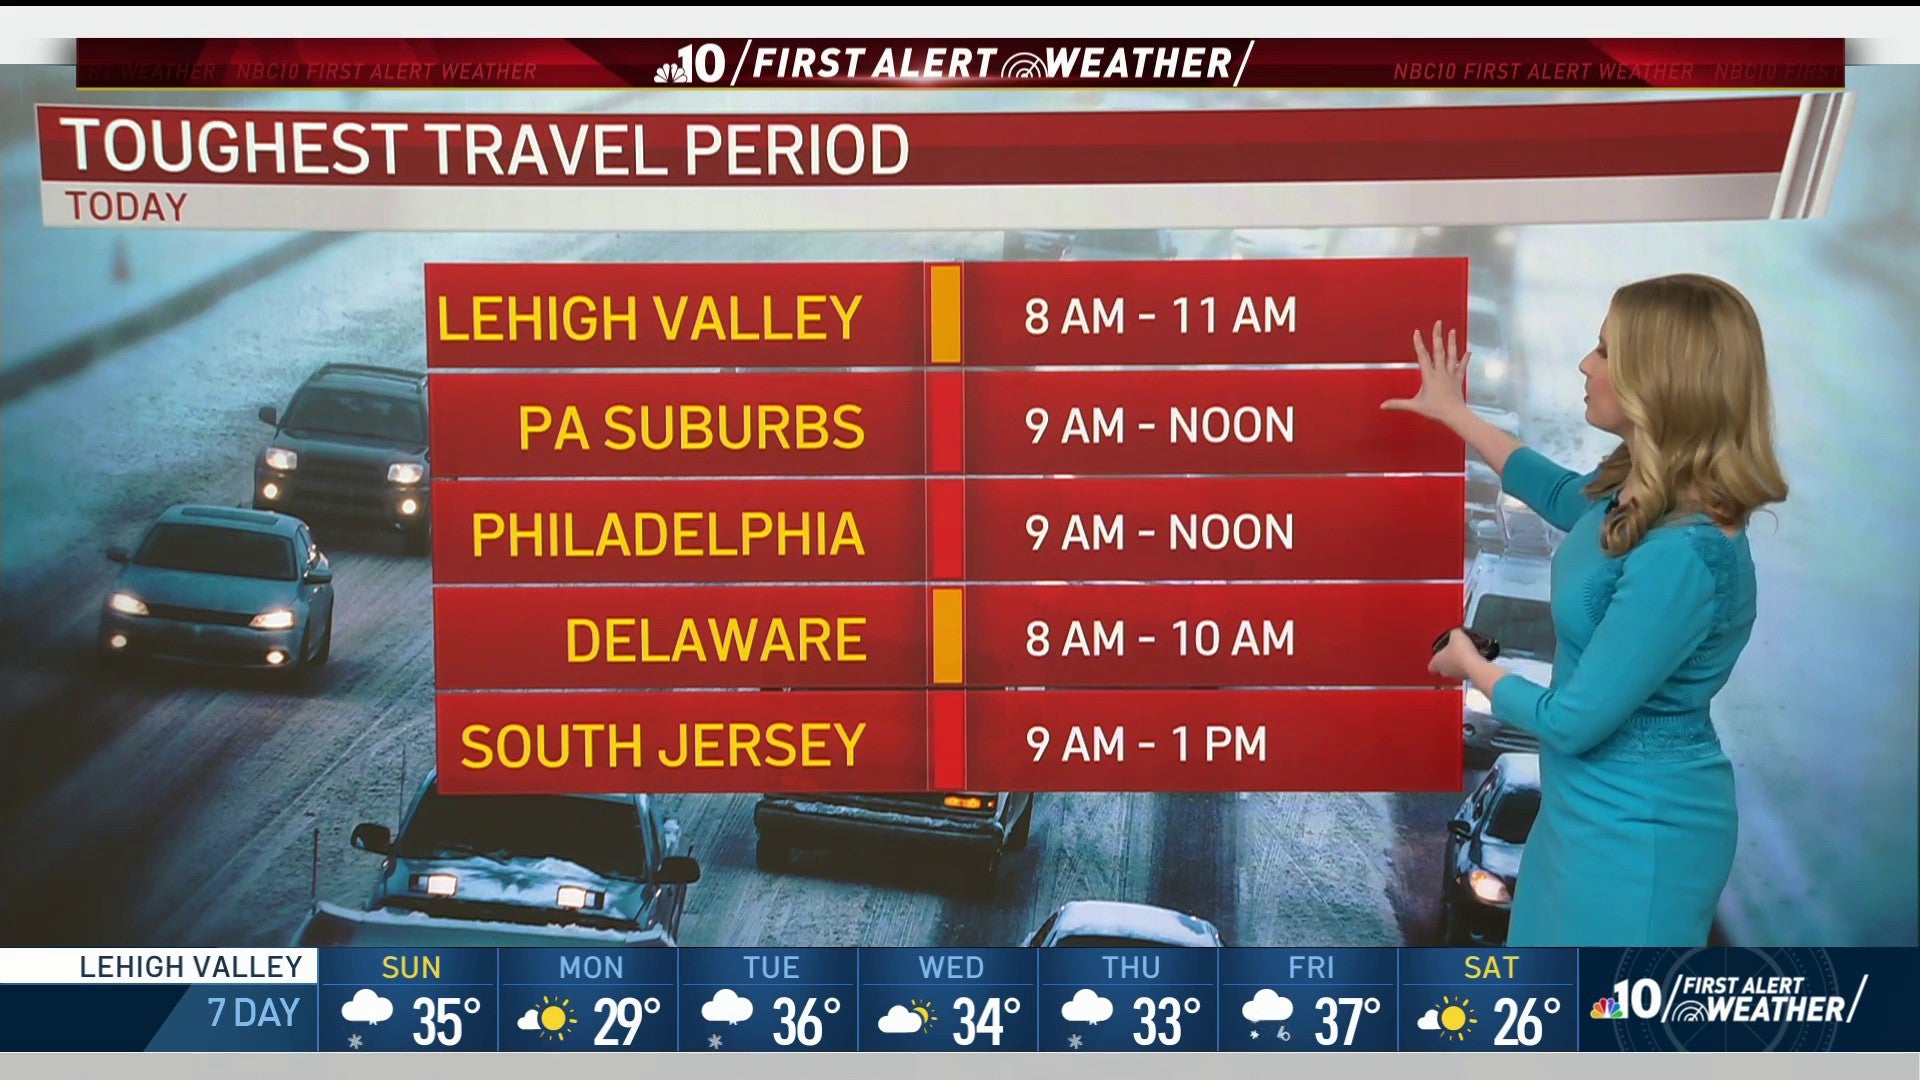 A graphic shows the toughest travel periods for Sunday, Feb. 7, 2021.